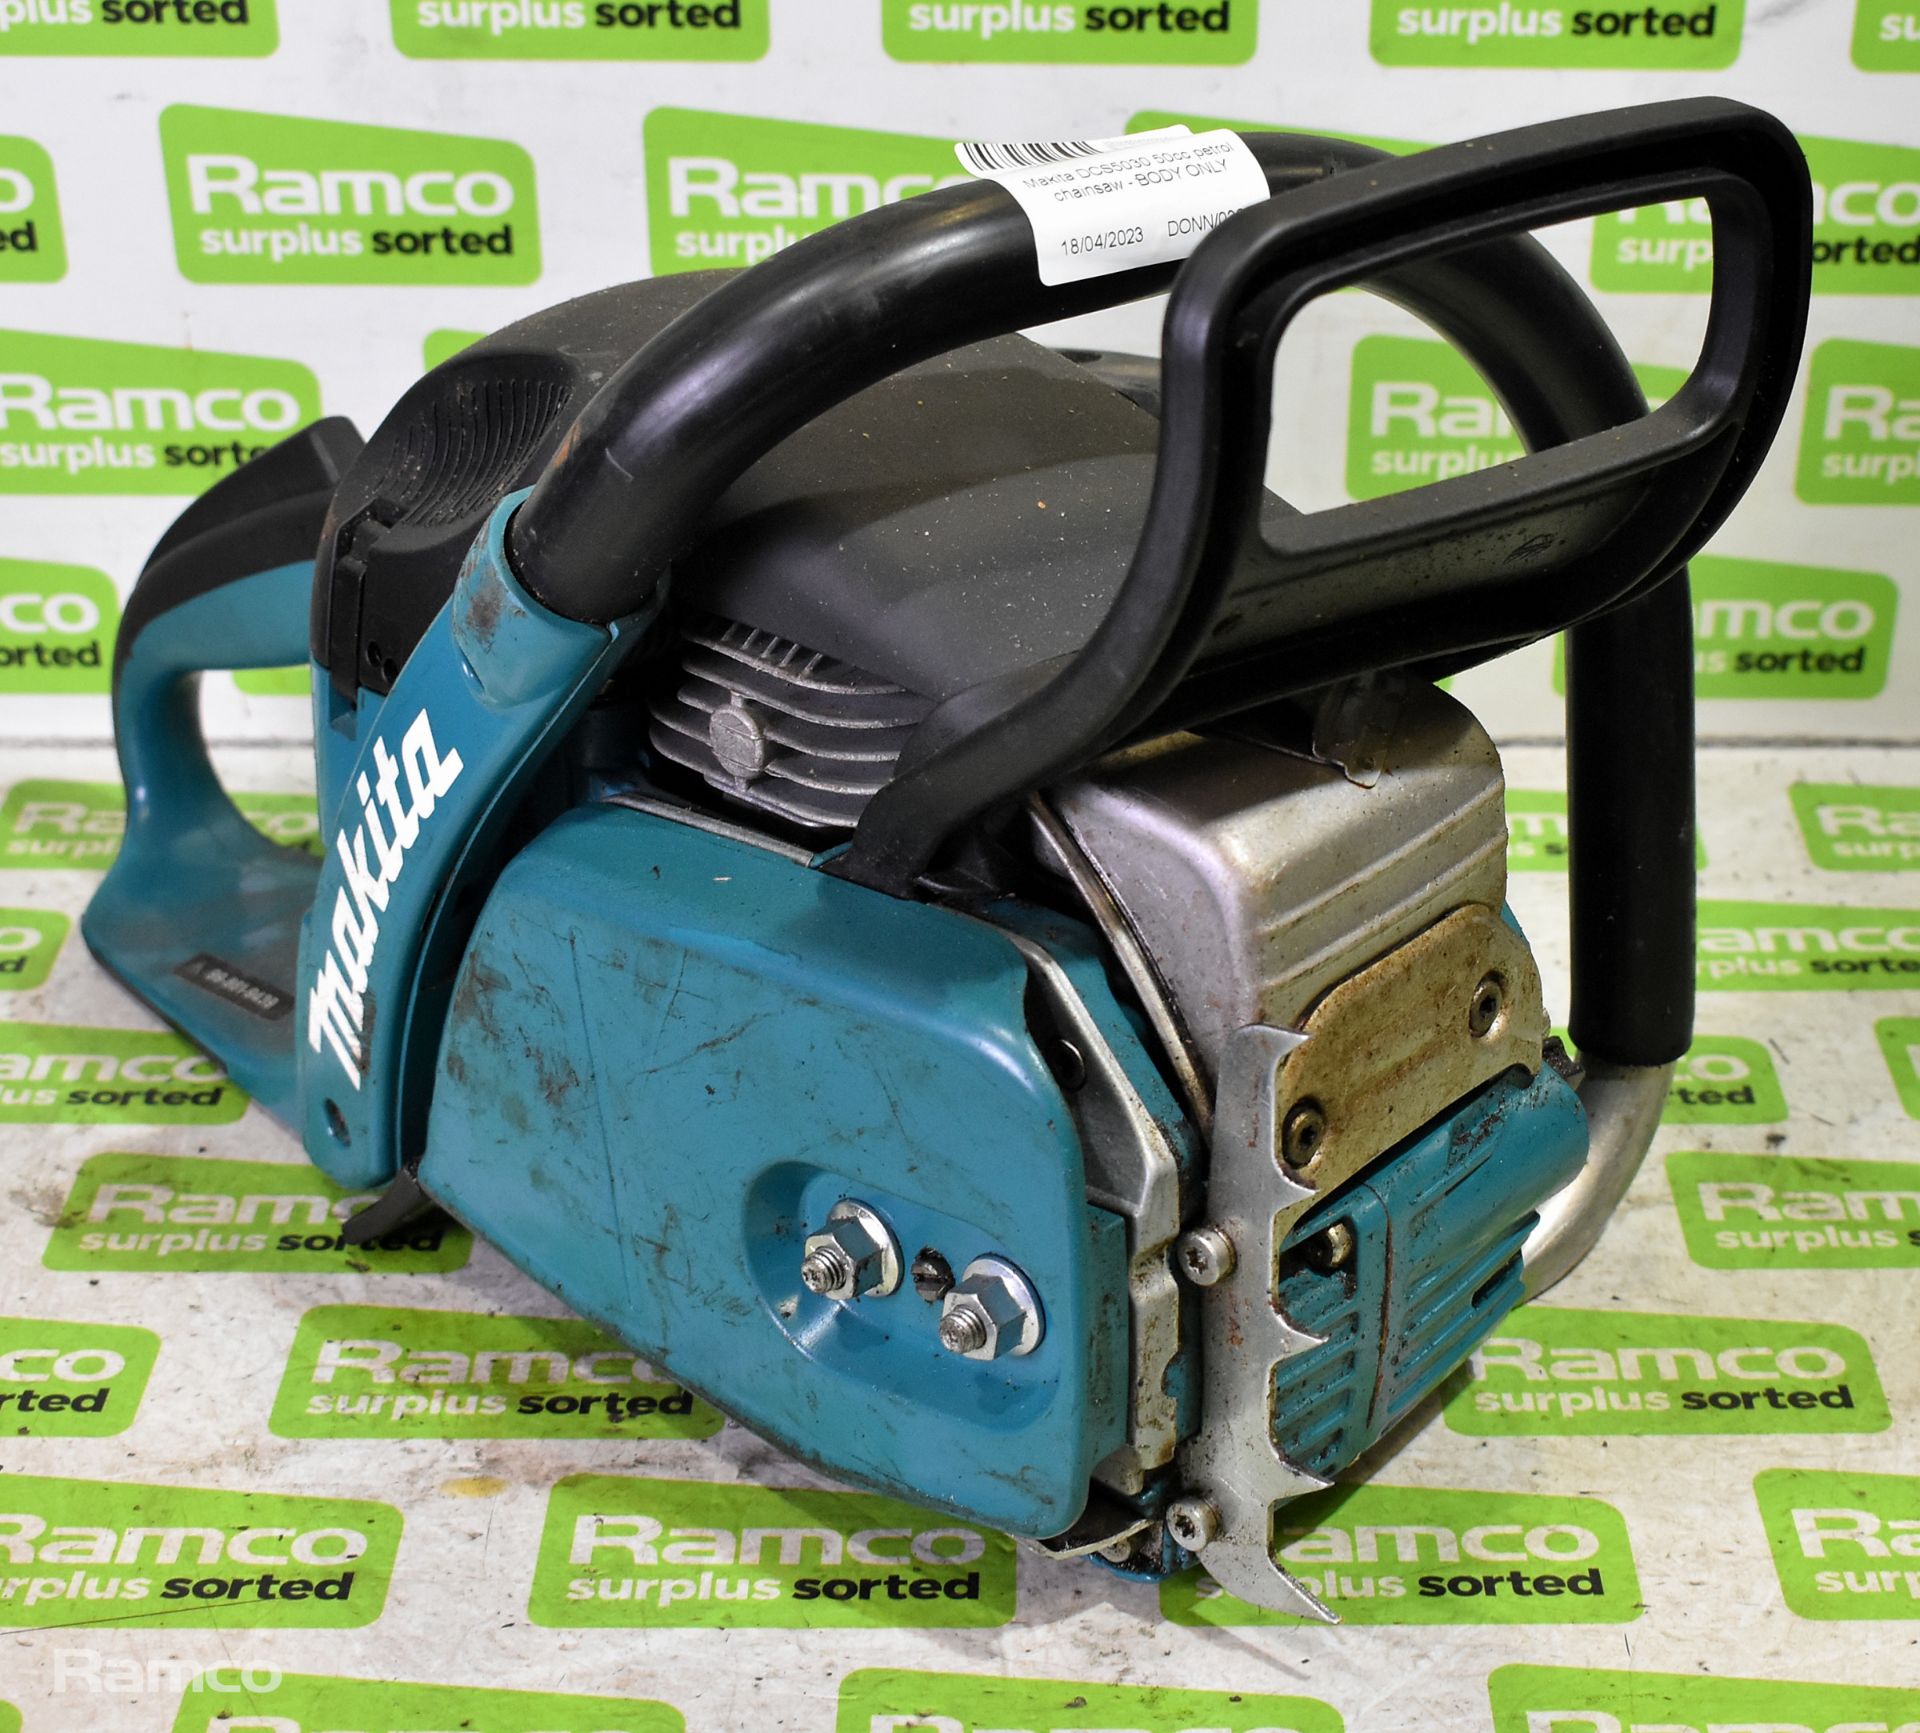 4x Makita DCS5030 50cc petrol chainsaws - BODIES ONLY - AS SPARES OR REPAIRS - Image 8 of 21